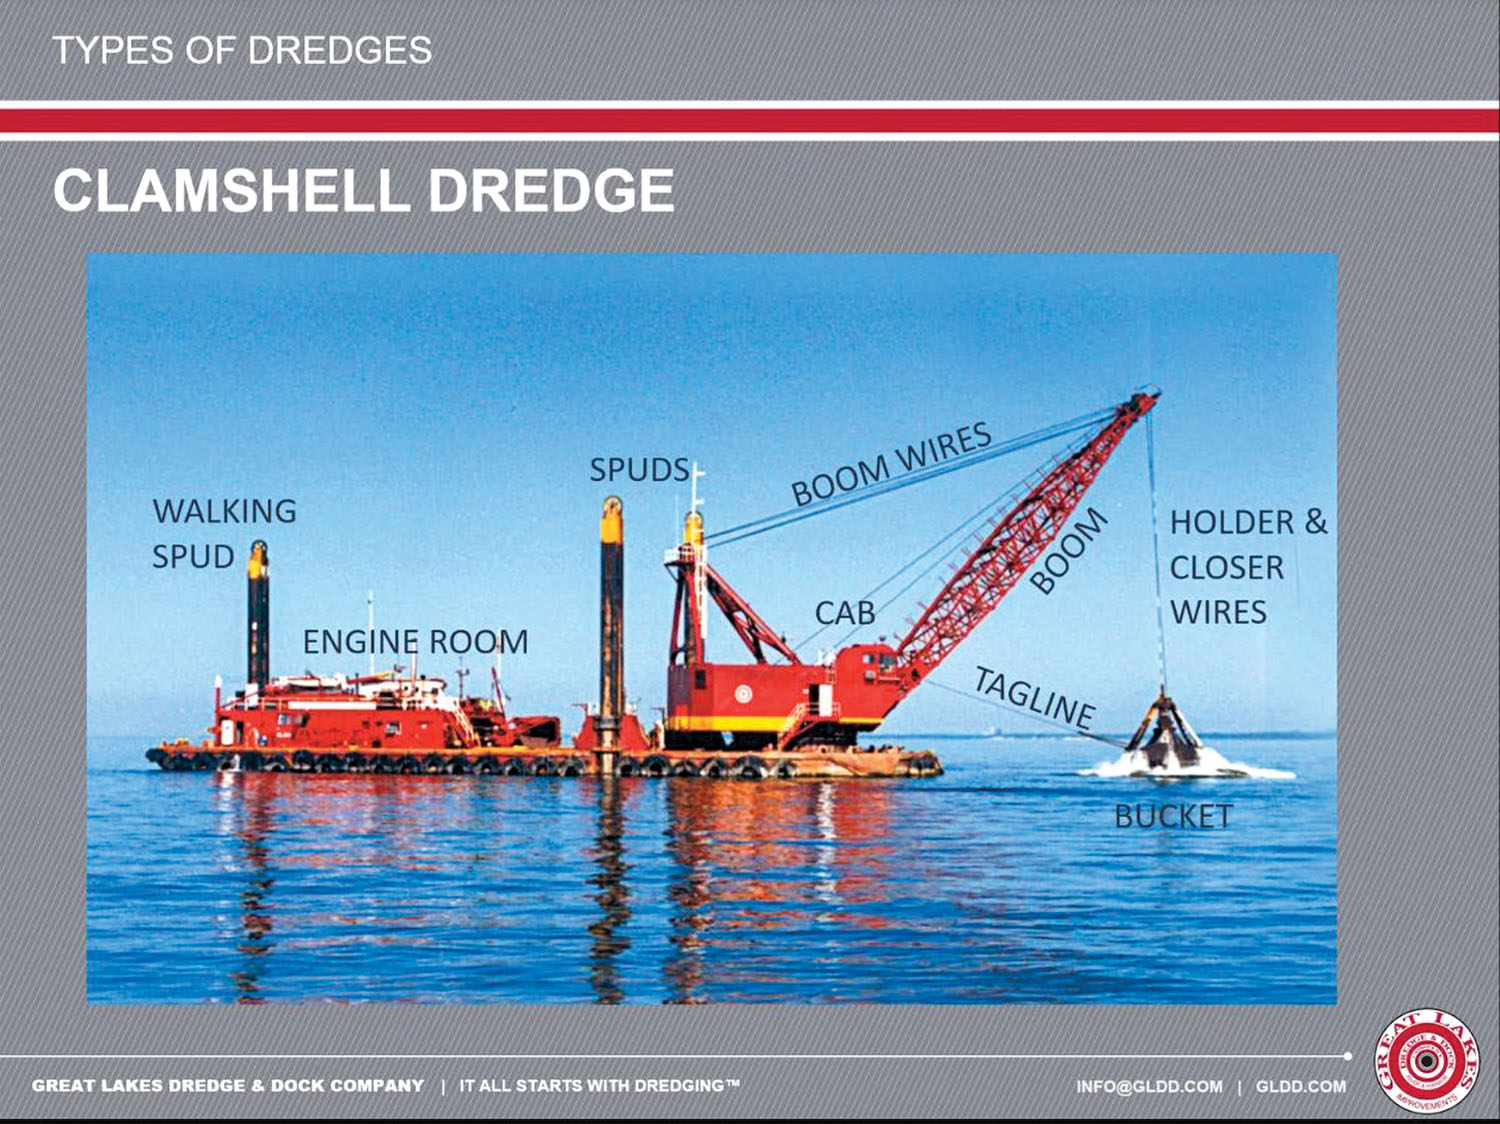 A diagram shows the parts of a clamshell dredge. Diagrams, photos and descriptions of several dredge types were part of a webinar Women In Maritime Operations (WIMOs) hosted for its members. Great Lakes Dredge & Dock Company and The Big River Coalition were the presenters. (Image courtesy of Great Lakes Dredge & Dock Company)